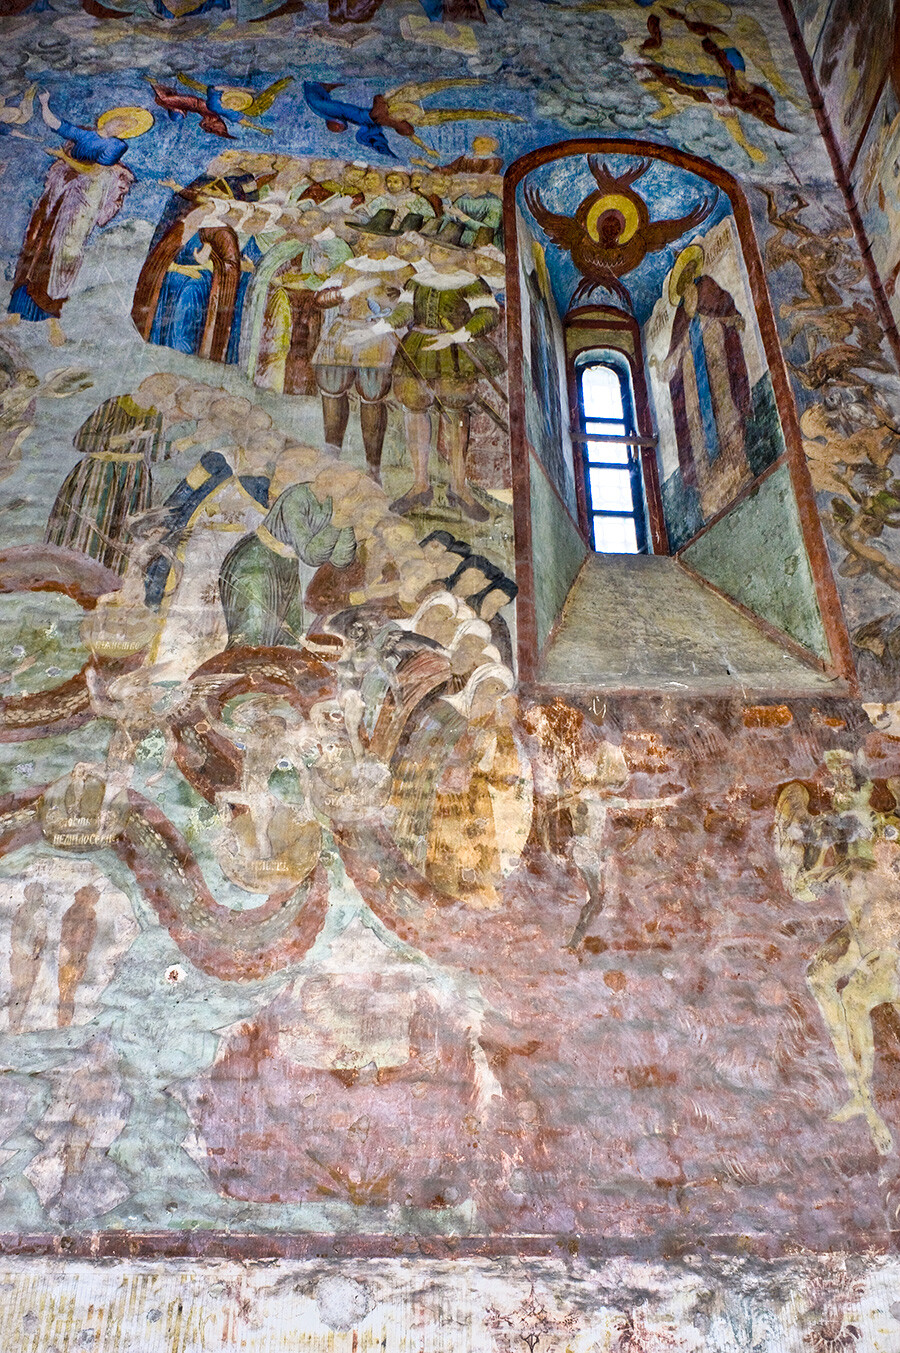 St. Sophia Cathedral. West wall, right side. Last Judgement fresco: foreigners among the damned & serpent descending with sinners to hell. July 17, 2013